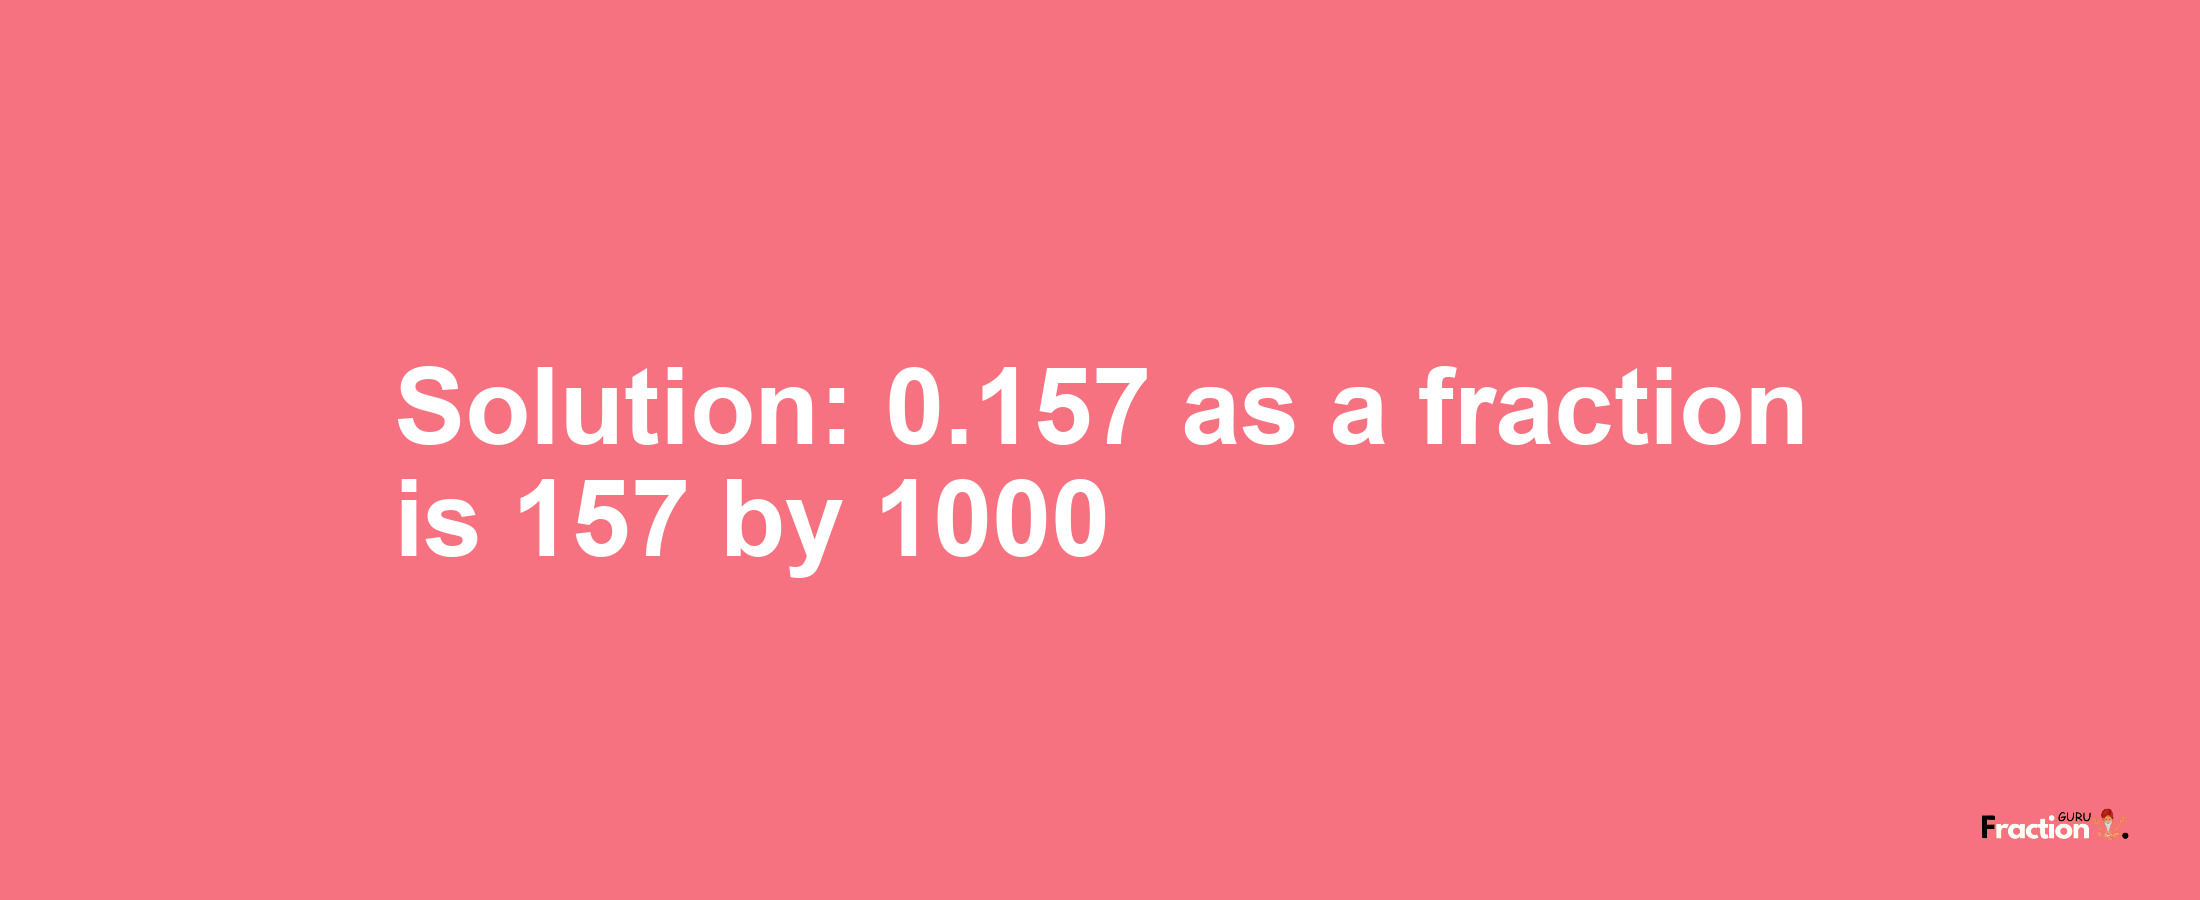 Solution:0.157 as a fraction is 157/1000